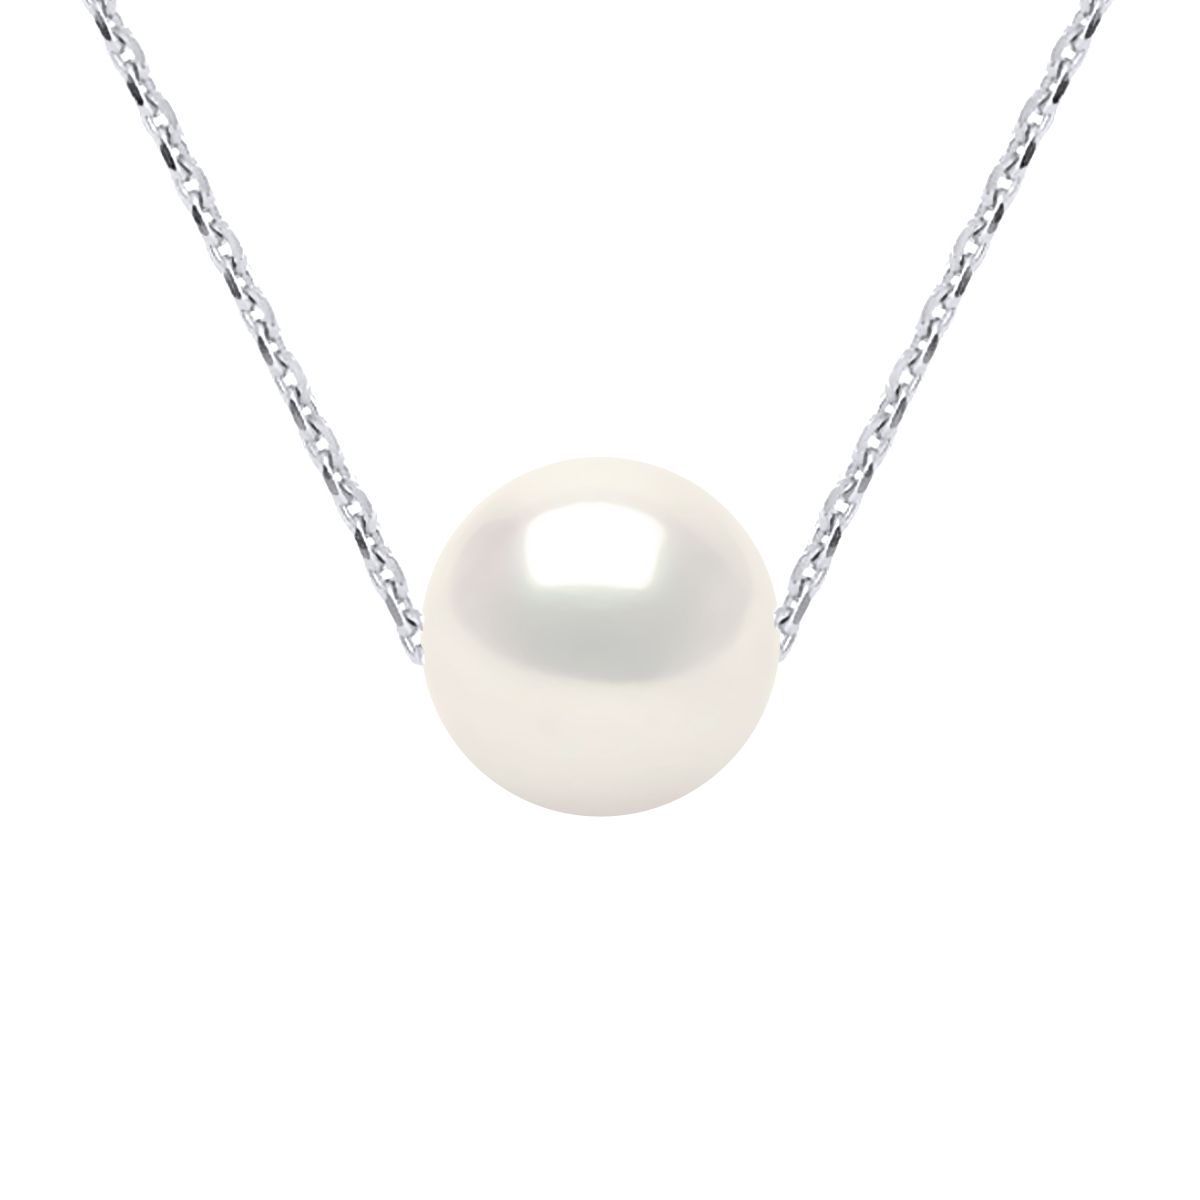 Necklace of true Cultured Freshwater Pearls 9-10 mm - Natural White Color and chain mesh 925 Sterling Silver Rhodium-plated Length 42 cm , 16,5 in - Our jewellery is made in France and will be delivered in a gift box accompanied by a Certificate of Authenticity and International Warranty